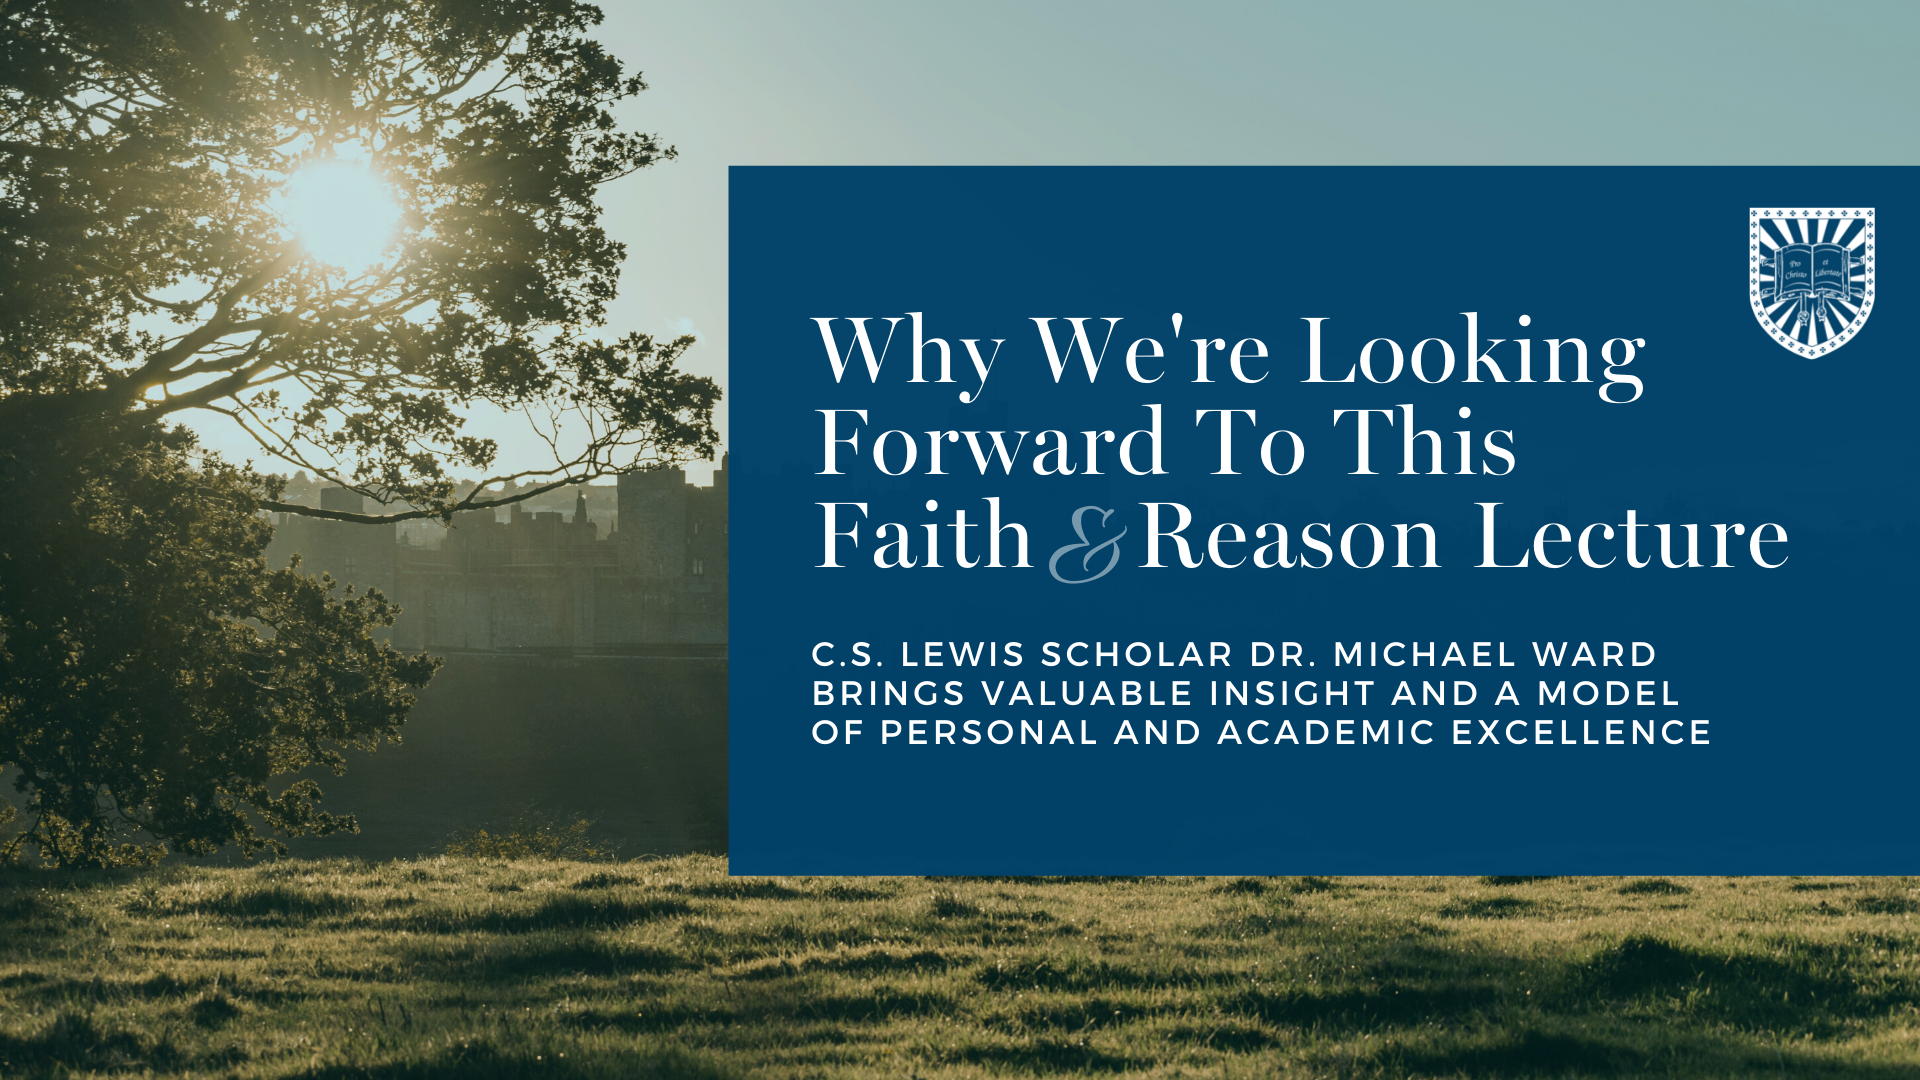 Why We're Looking Forward To This Faith & Reason Lecture